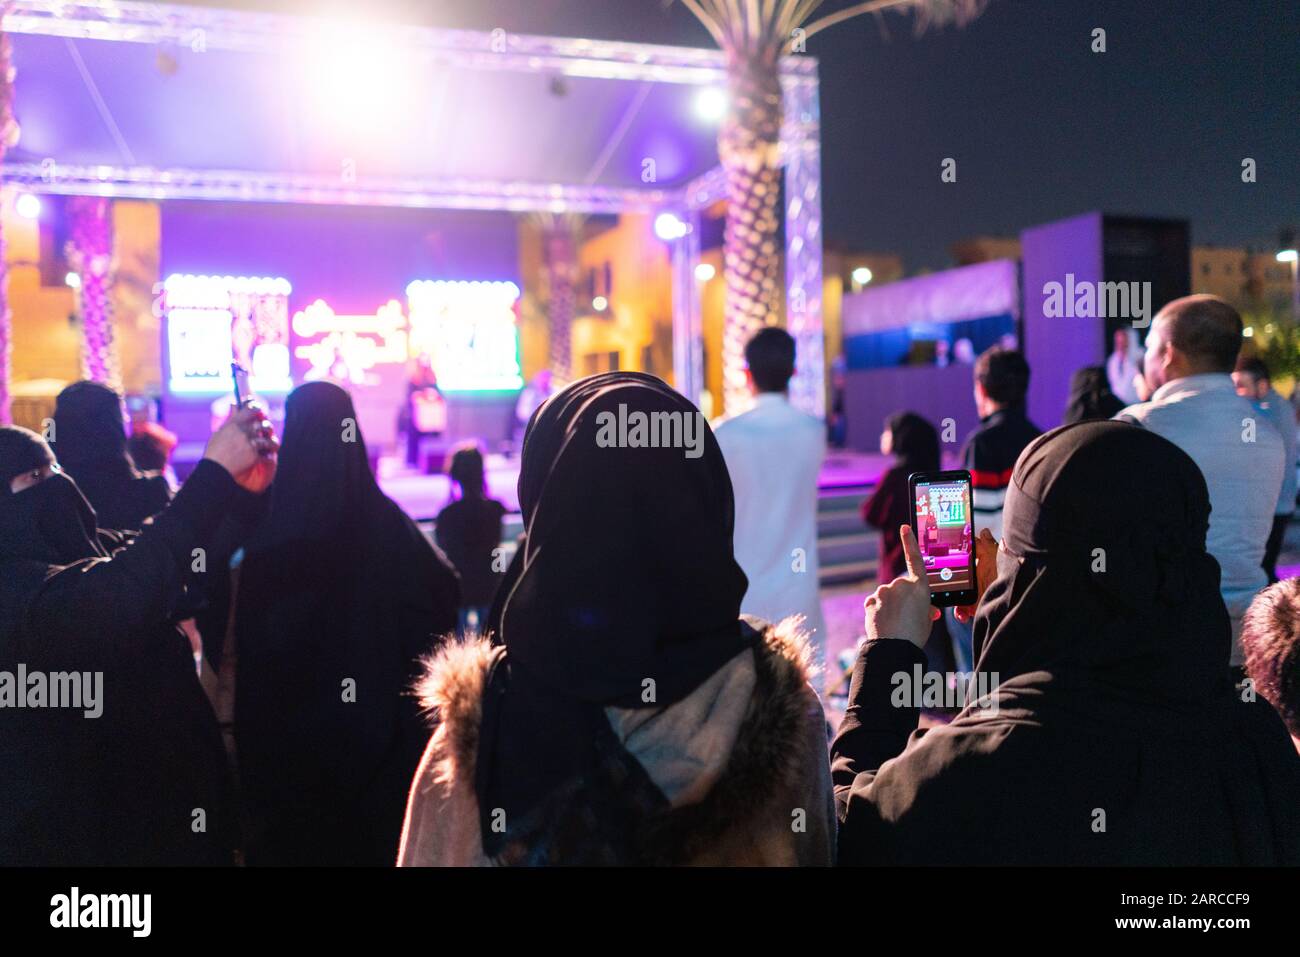 Women in Saudi Arabia filming an outdoor concert at night on their mobile phones in Riyadh at the Riyadh Season festival event Stock Photo